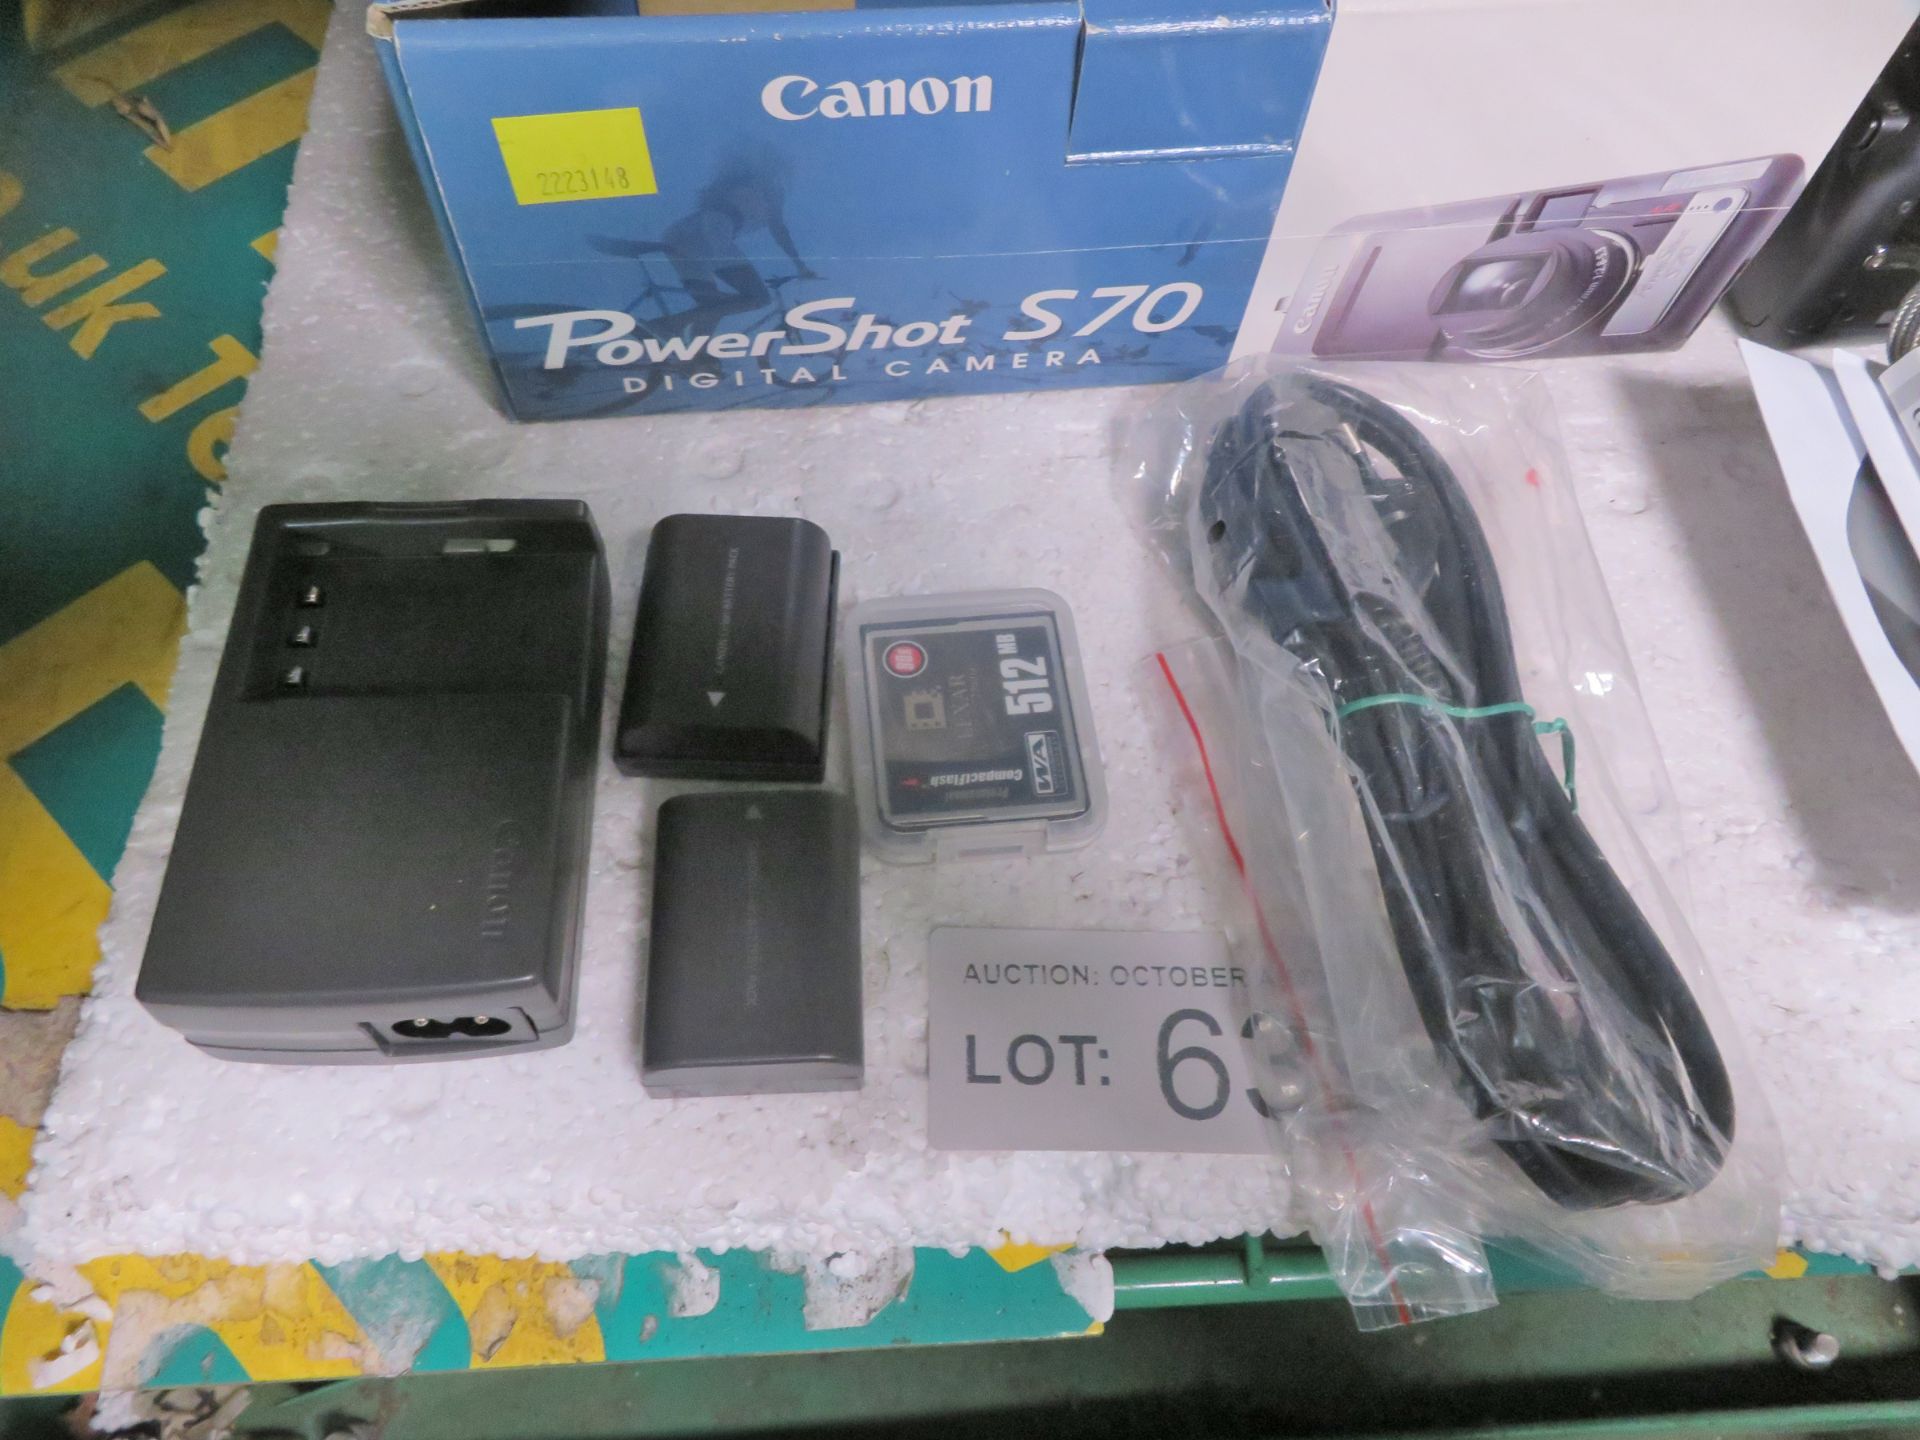 Canon PowerShot S70 Digital Camera with accessories - Image 5 of 5